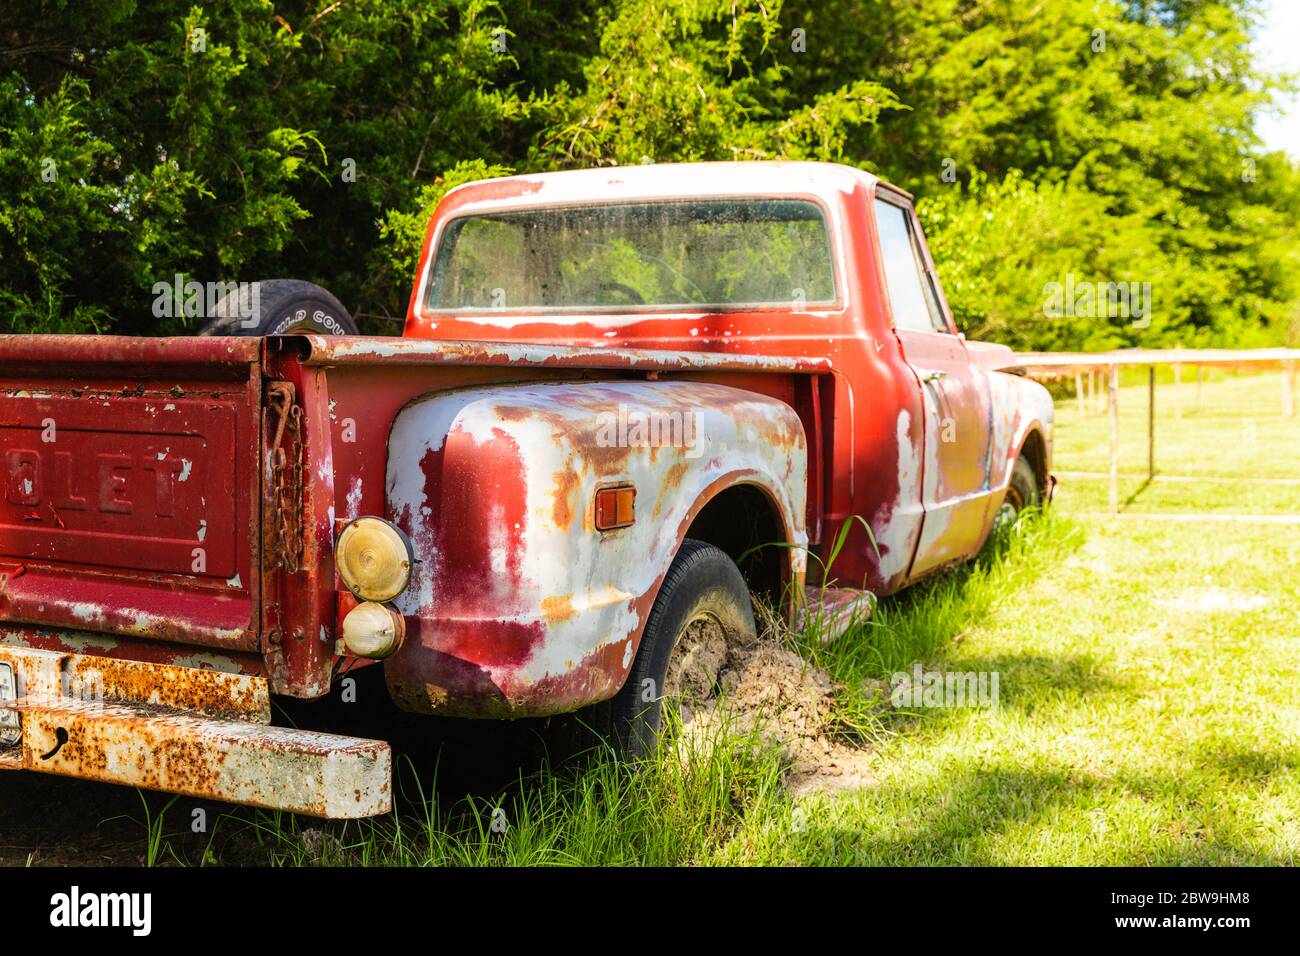 Abandoned Antique red truck parked in a field on a farm Stock Photo